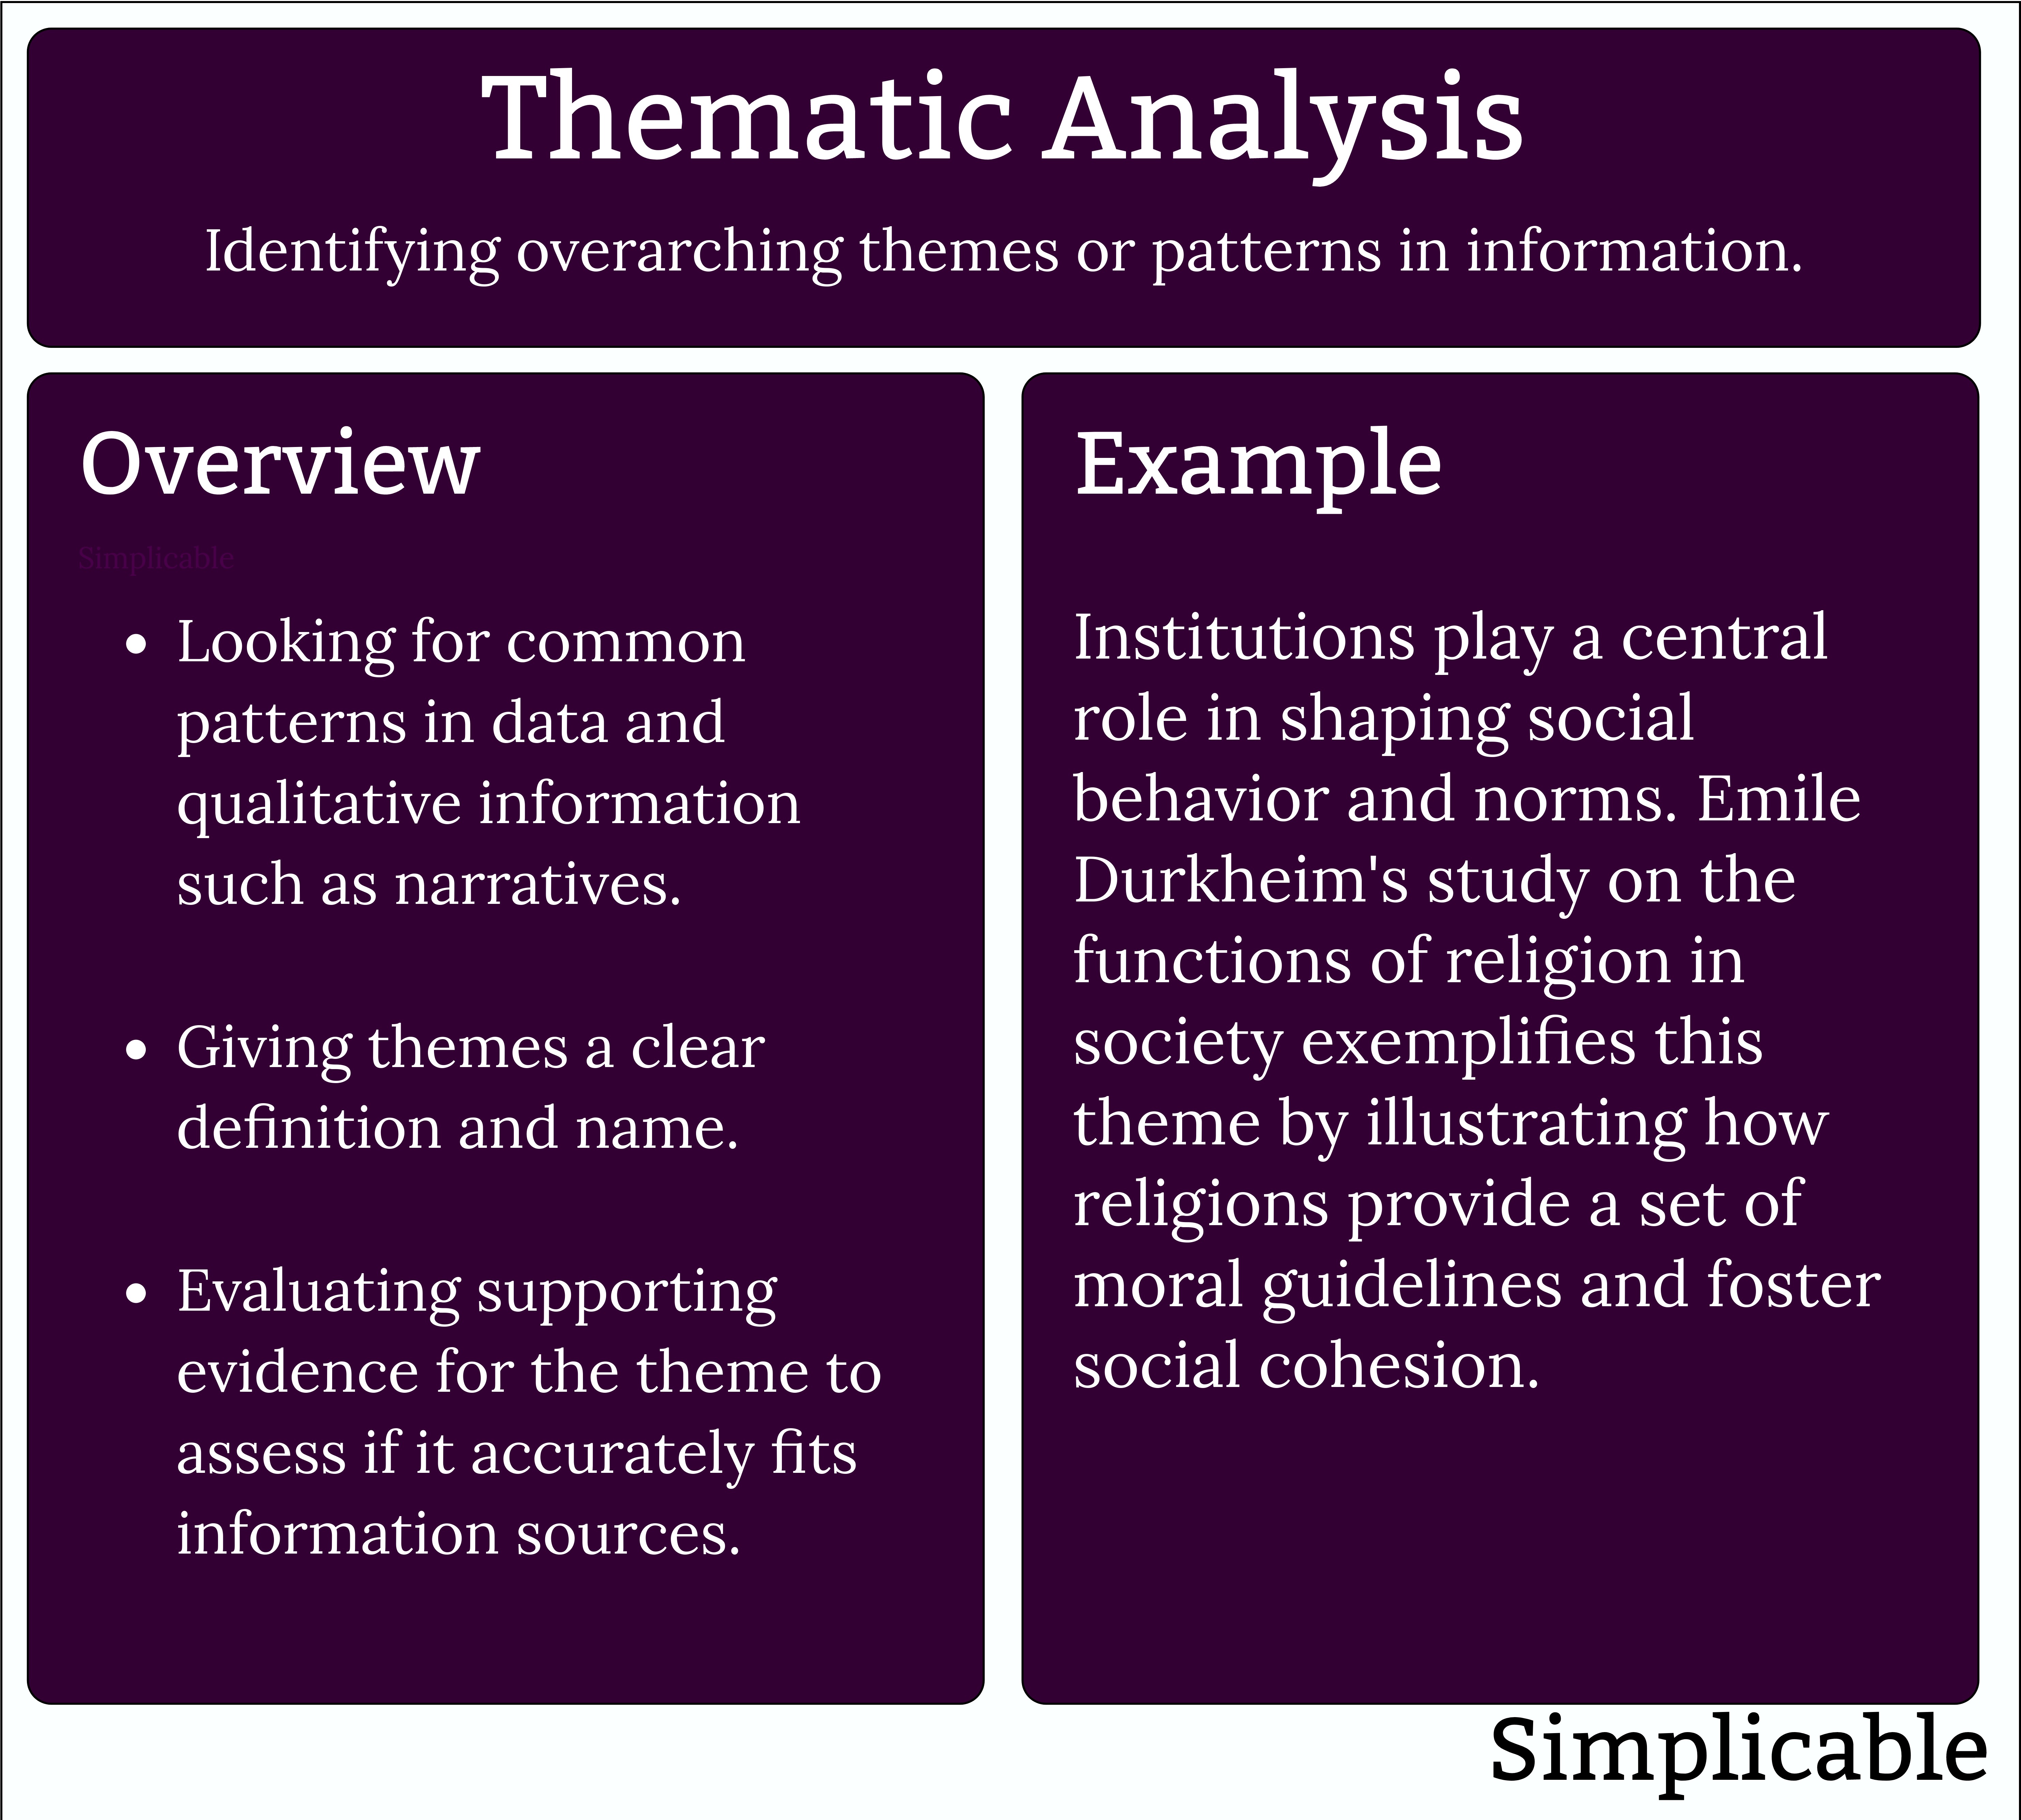 thematic analysis summary and example